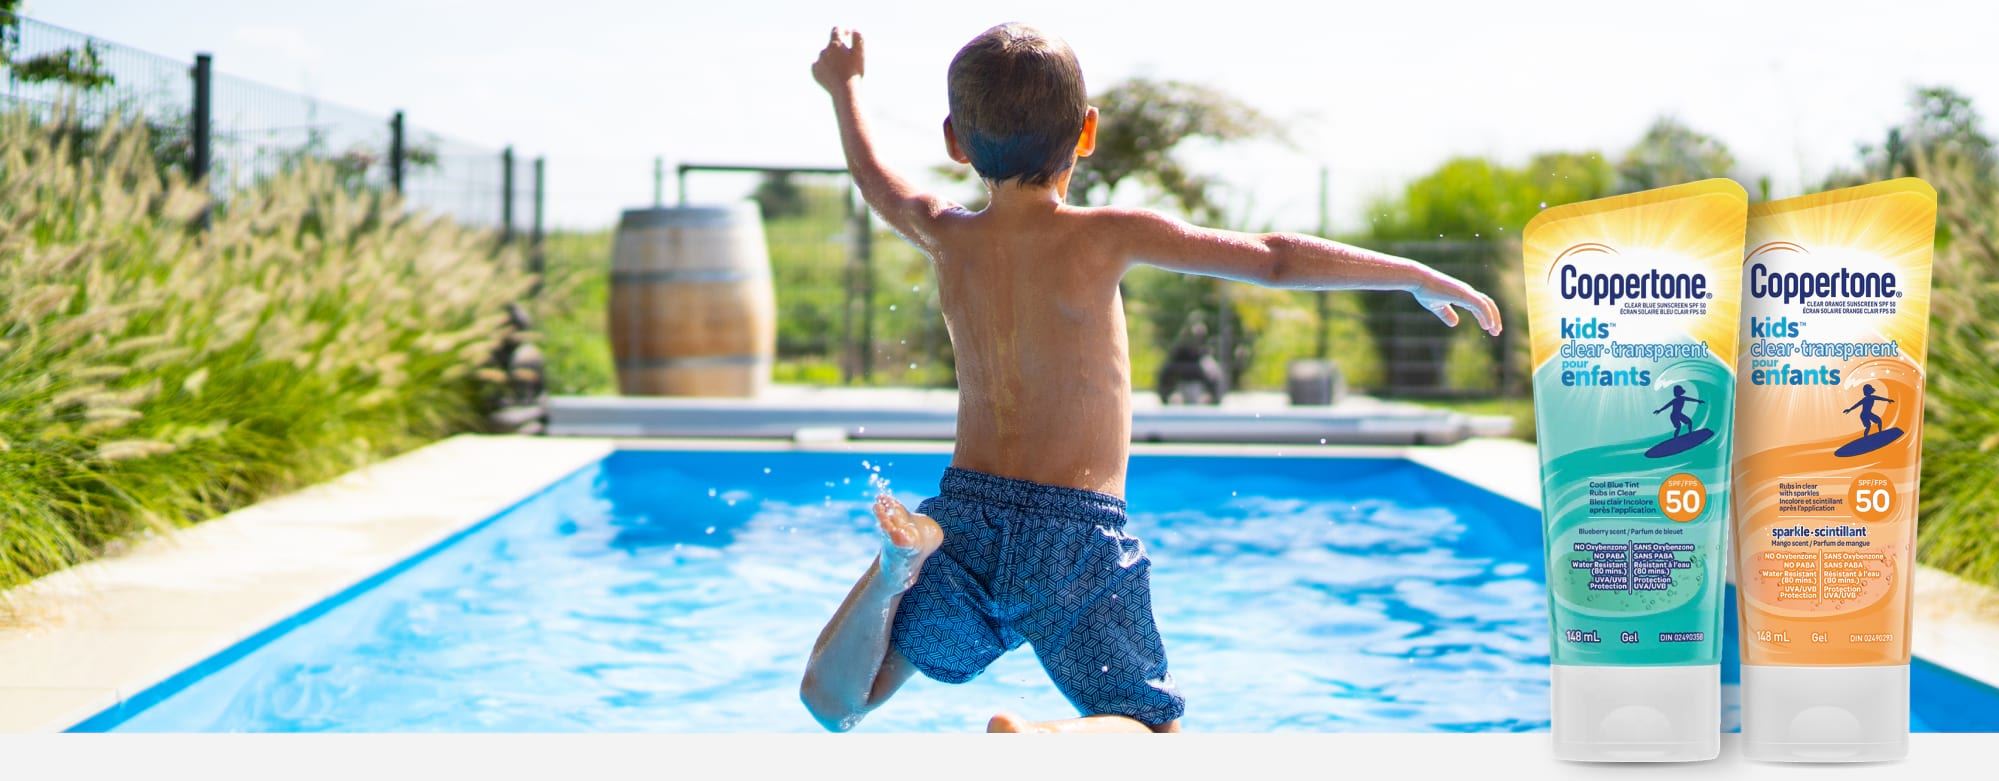 Kid jumping in a pool